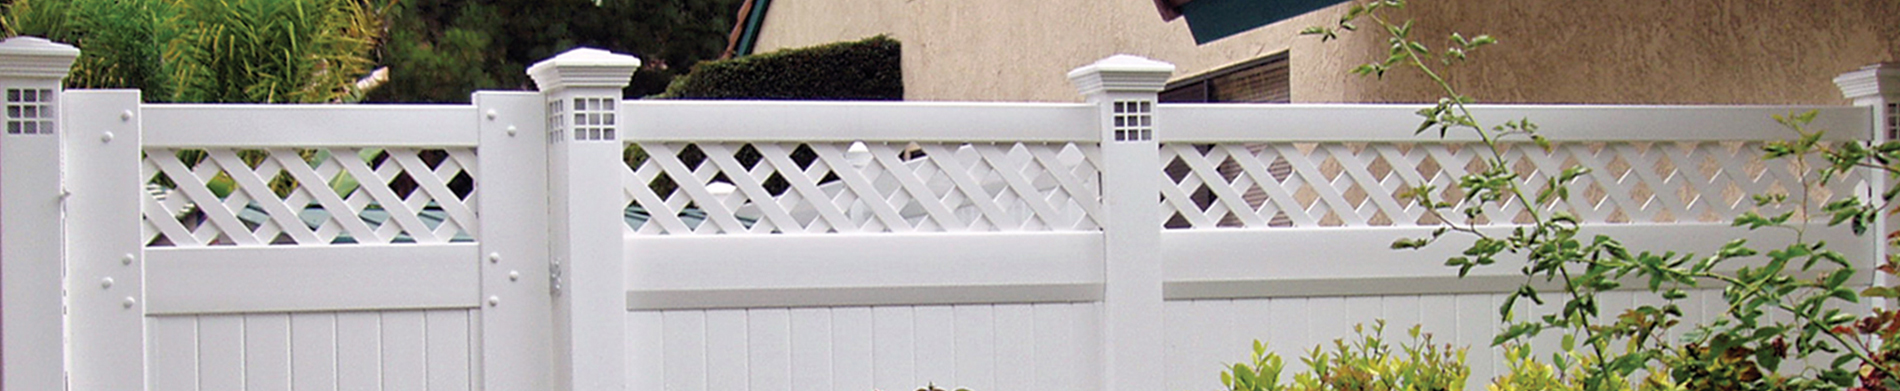 Vinyl Fencing from Duramax – A home improvement solution